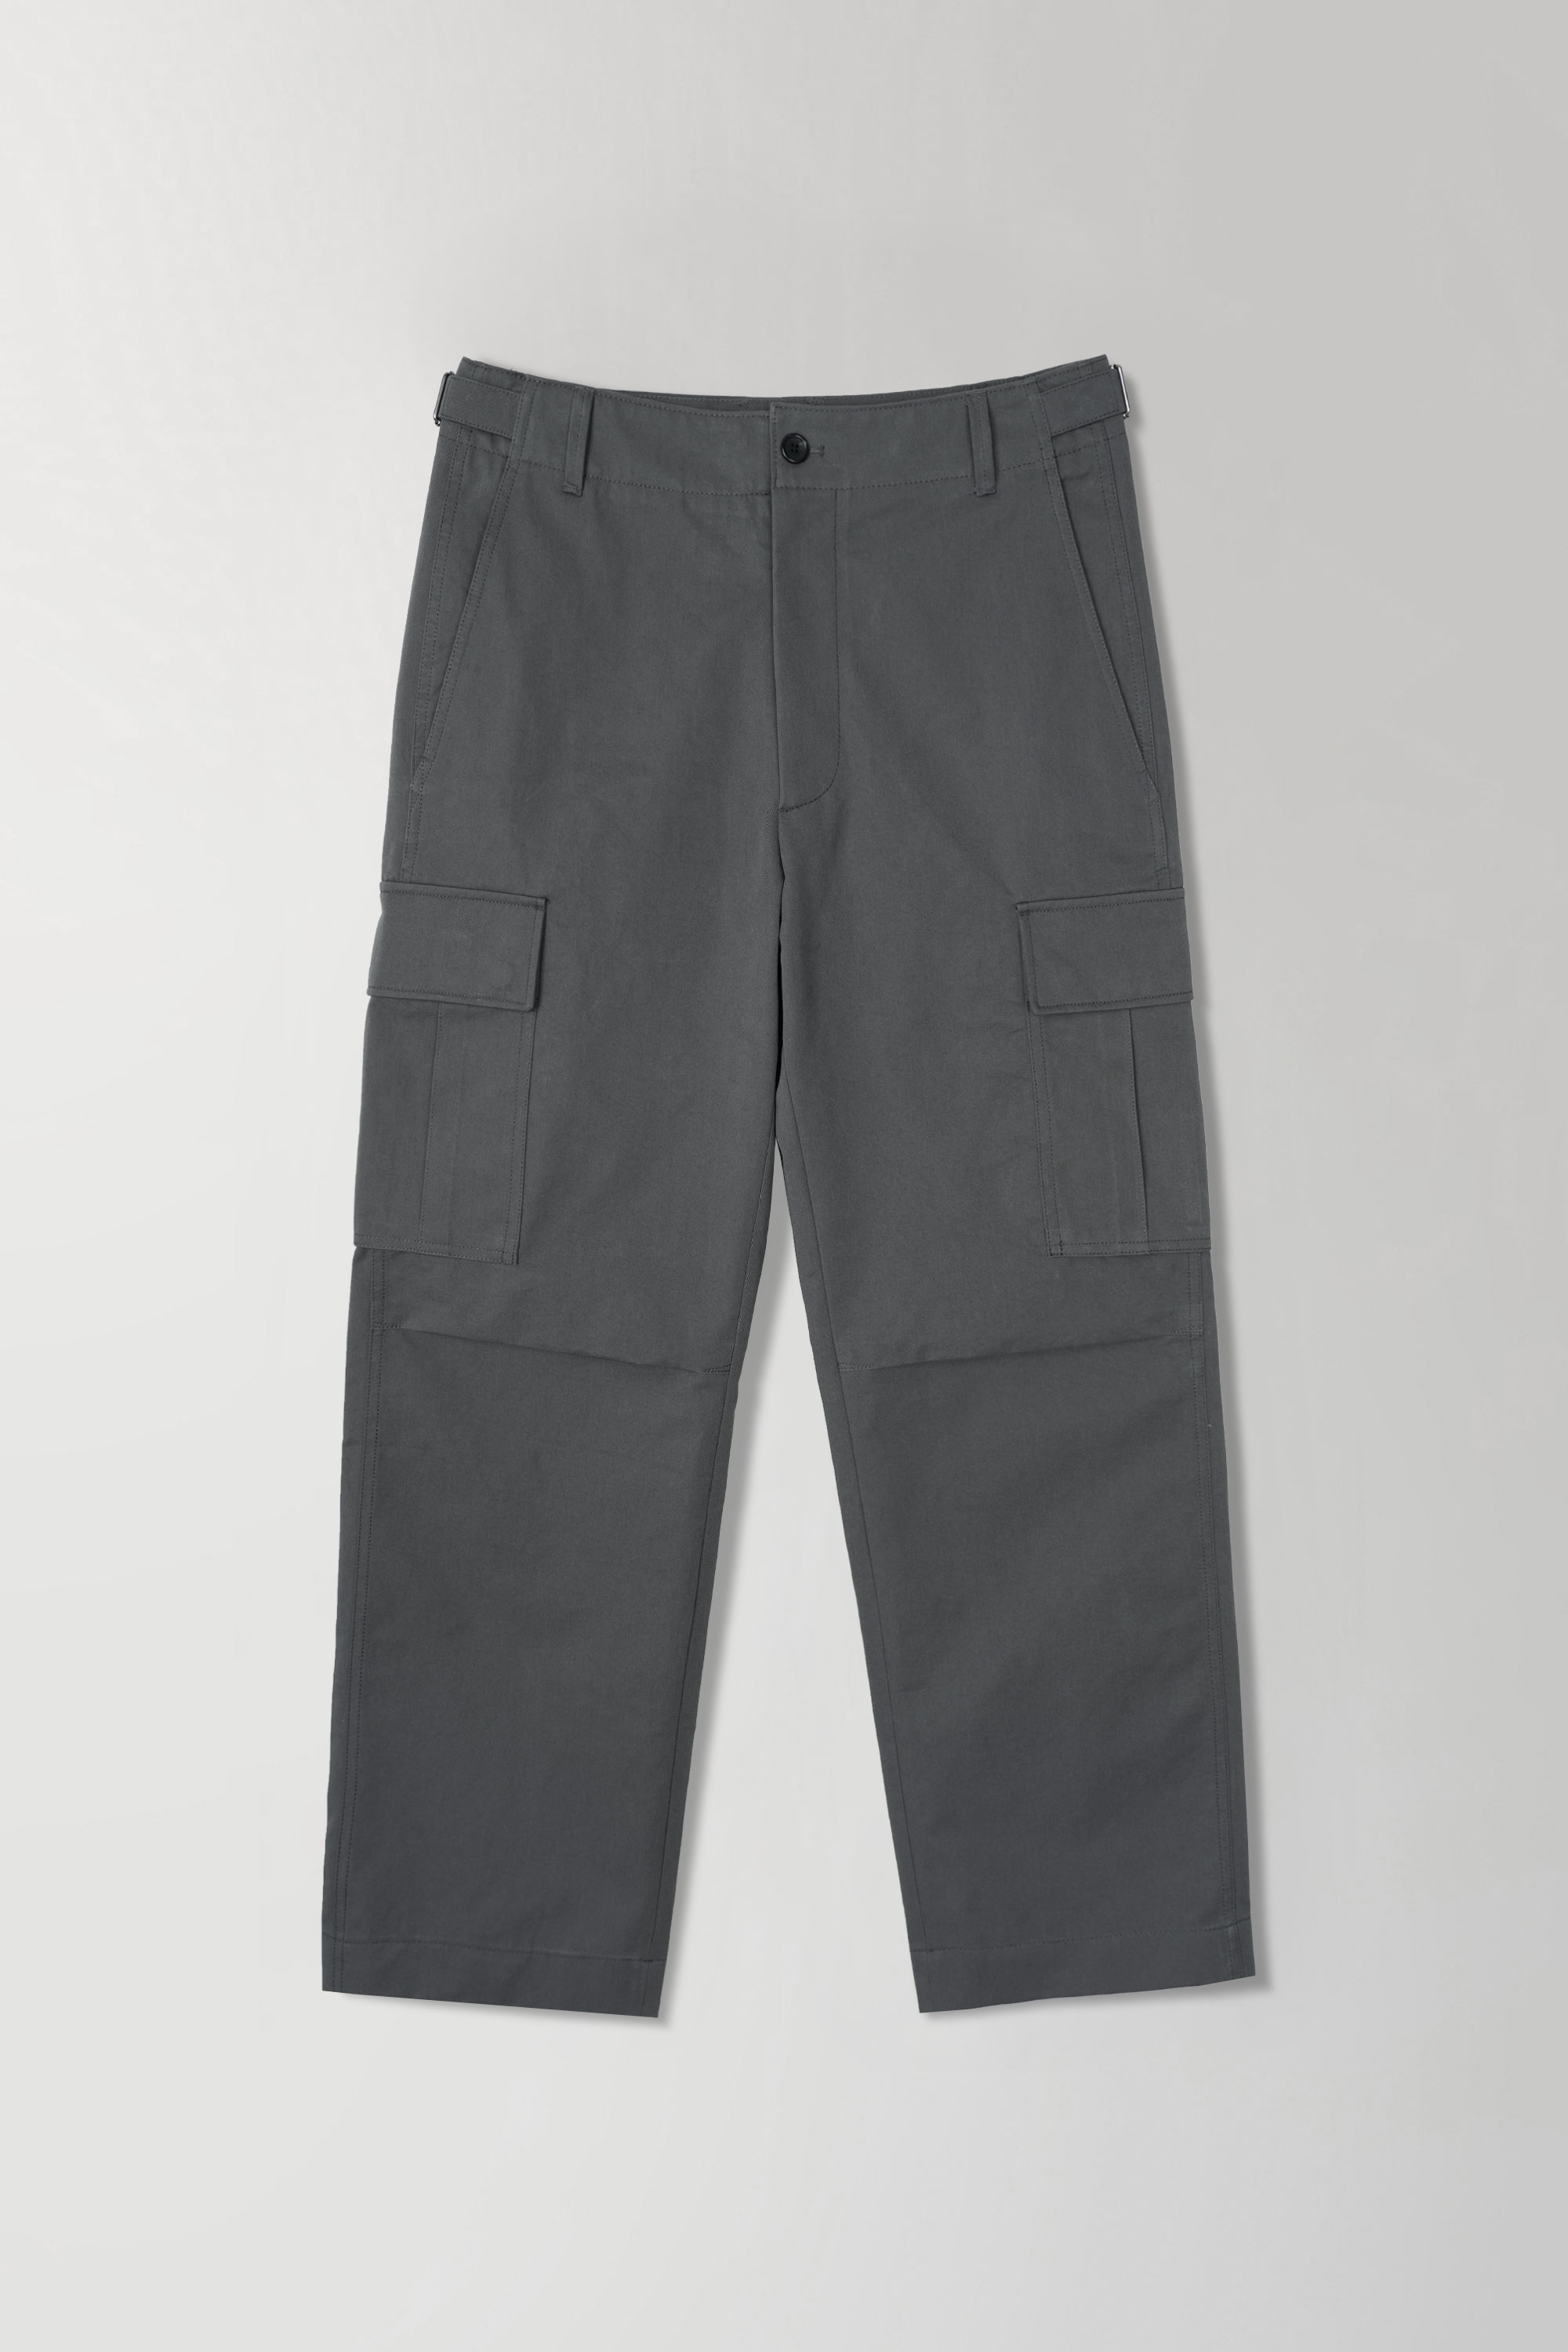 FIELD CHINO PANTS - ANTHRACITE